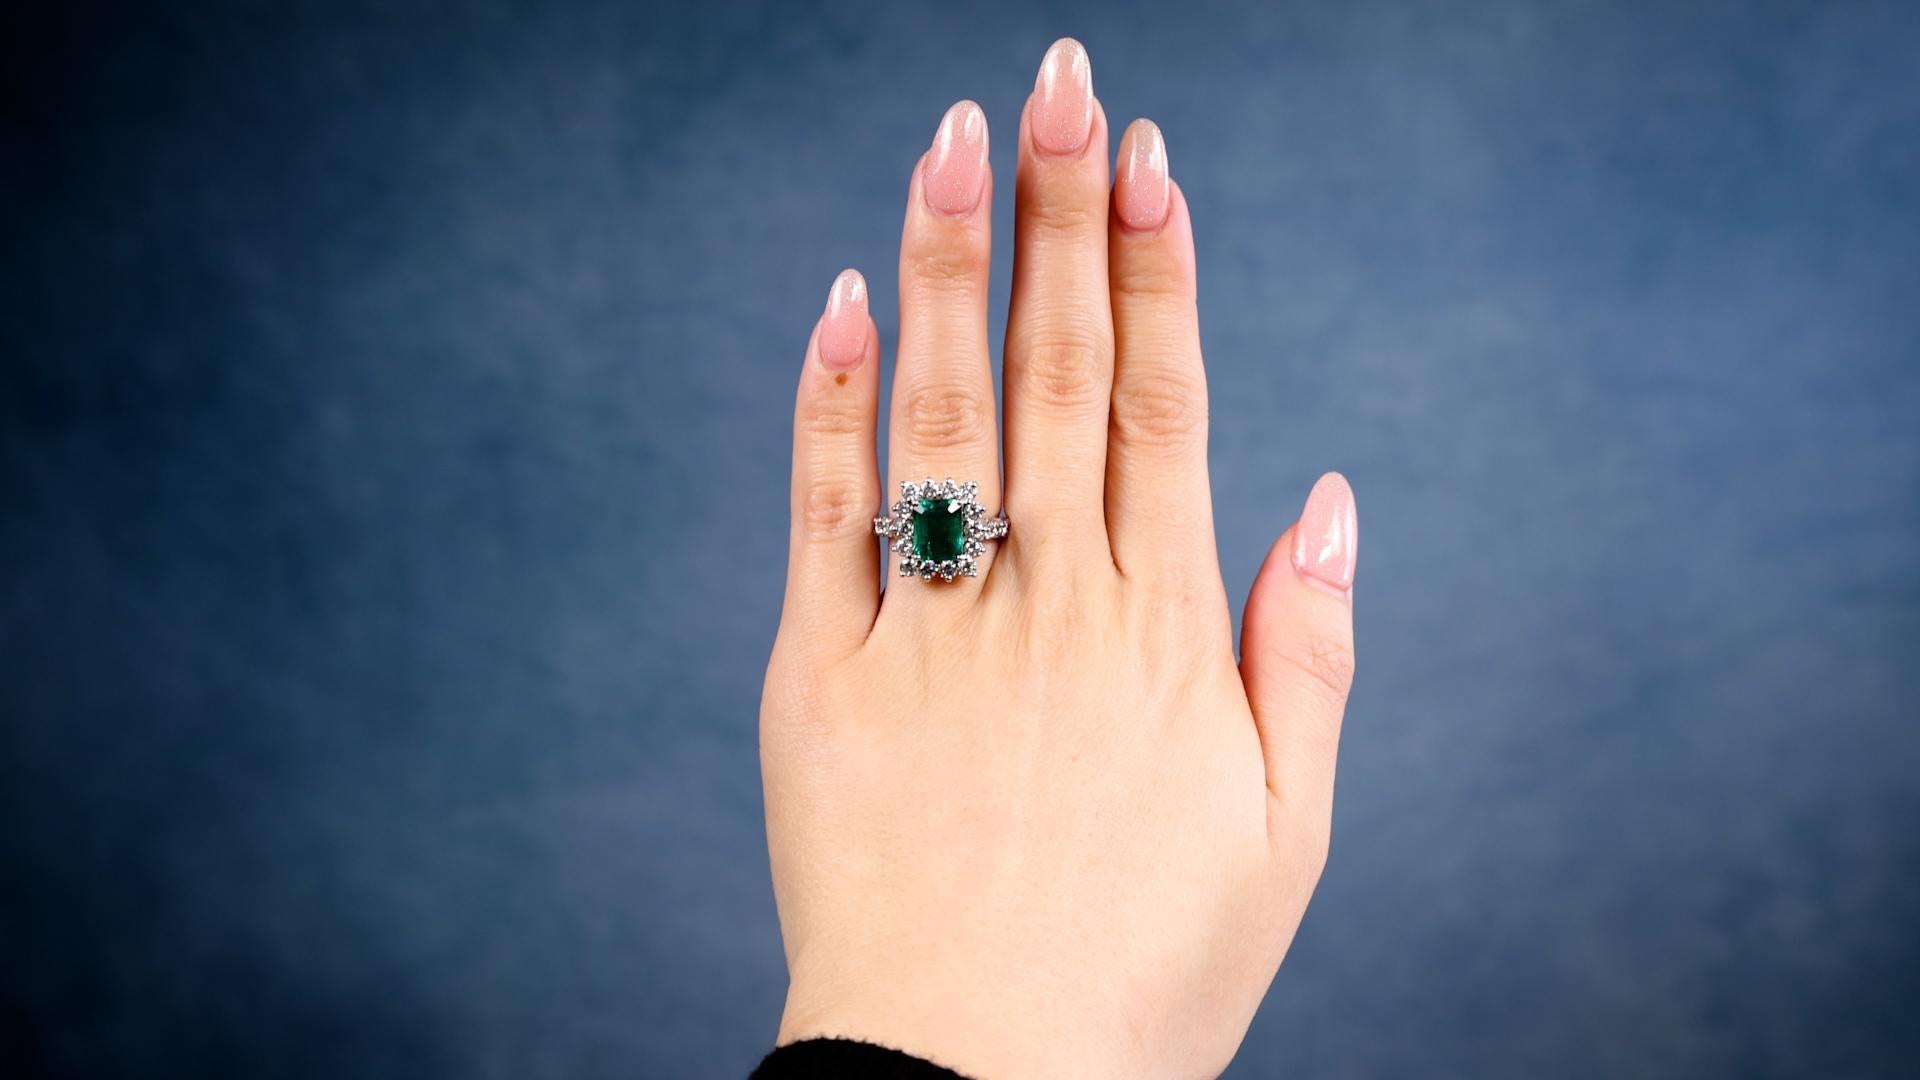 One Vintage French GIA Zambian Emerald Diamond 18k White Gold Ring. Featuring one GIA octagonal step cut emerald weighing approximately 2.10 carats, accompanied by GIA #5231183429 stating the emerald is of Zambian origin. Accented by 20 round